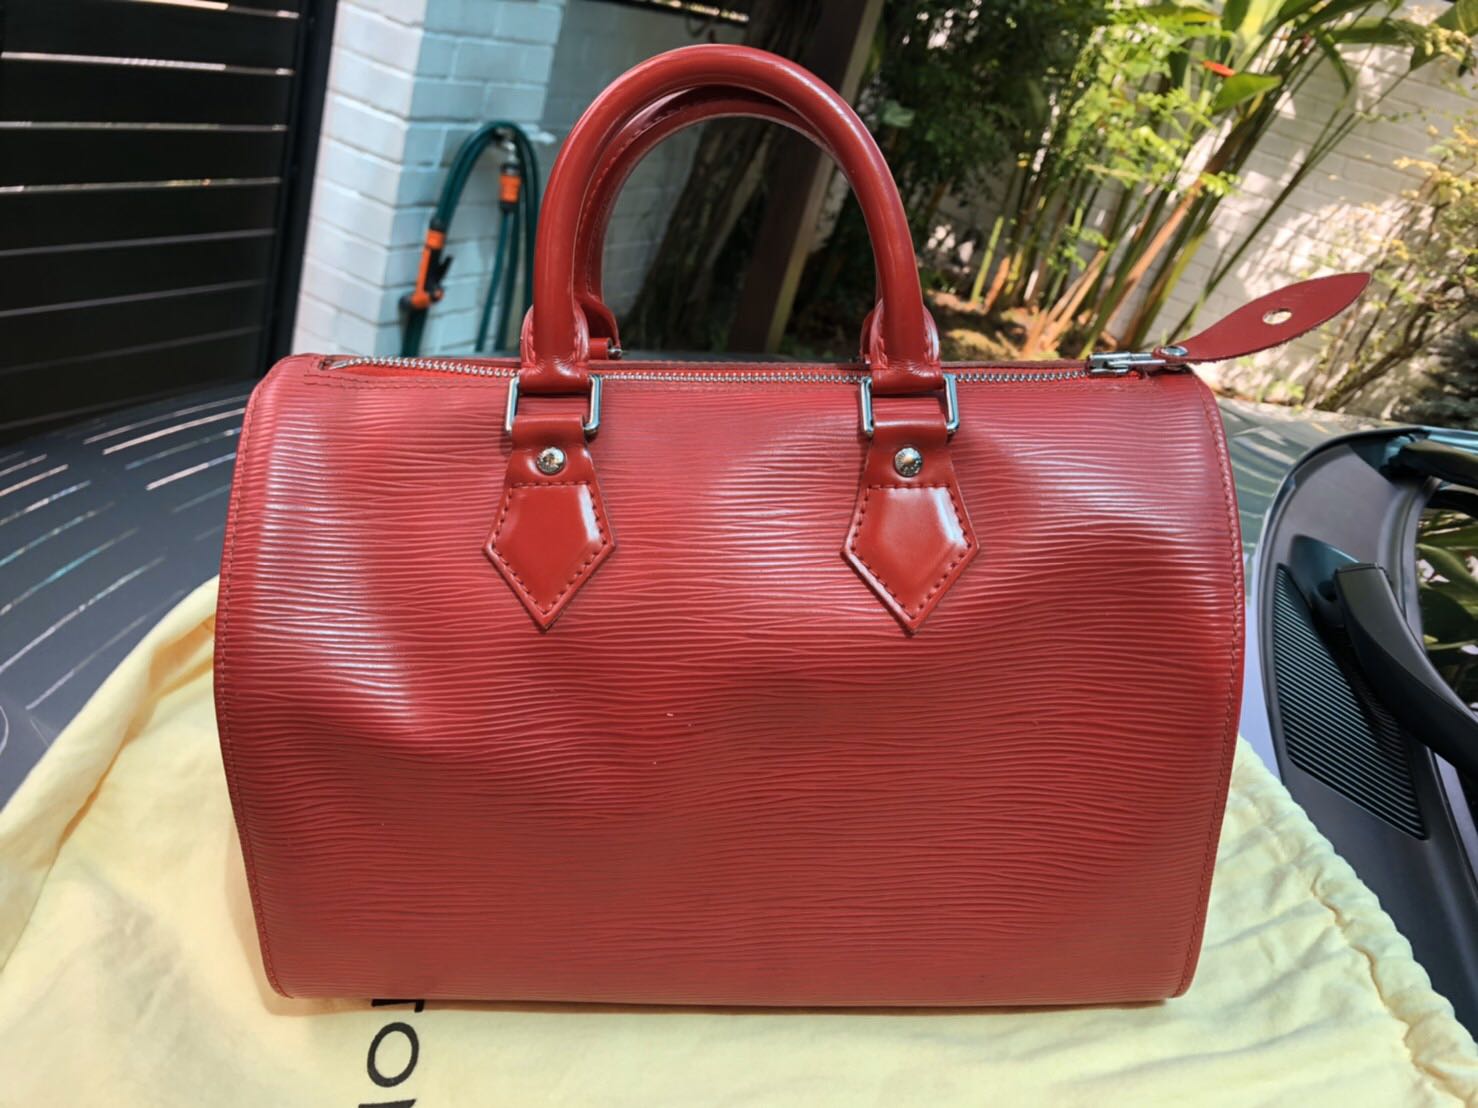 Louis Vuitton Red/Green Epi Leather Limited Editoin Speedy 25